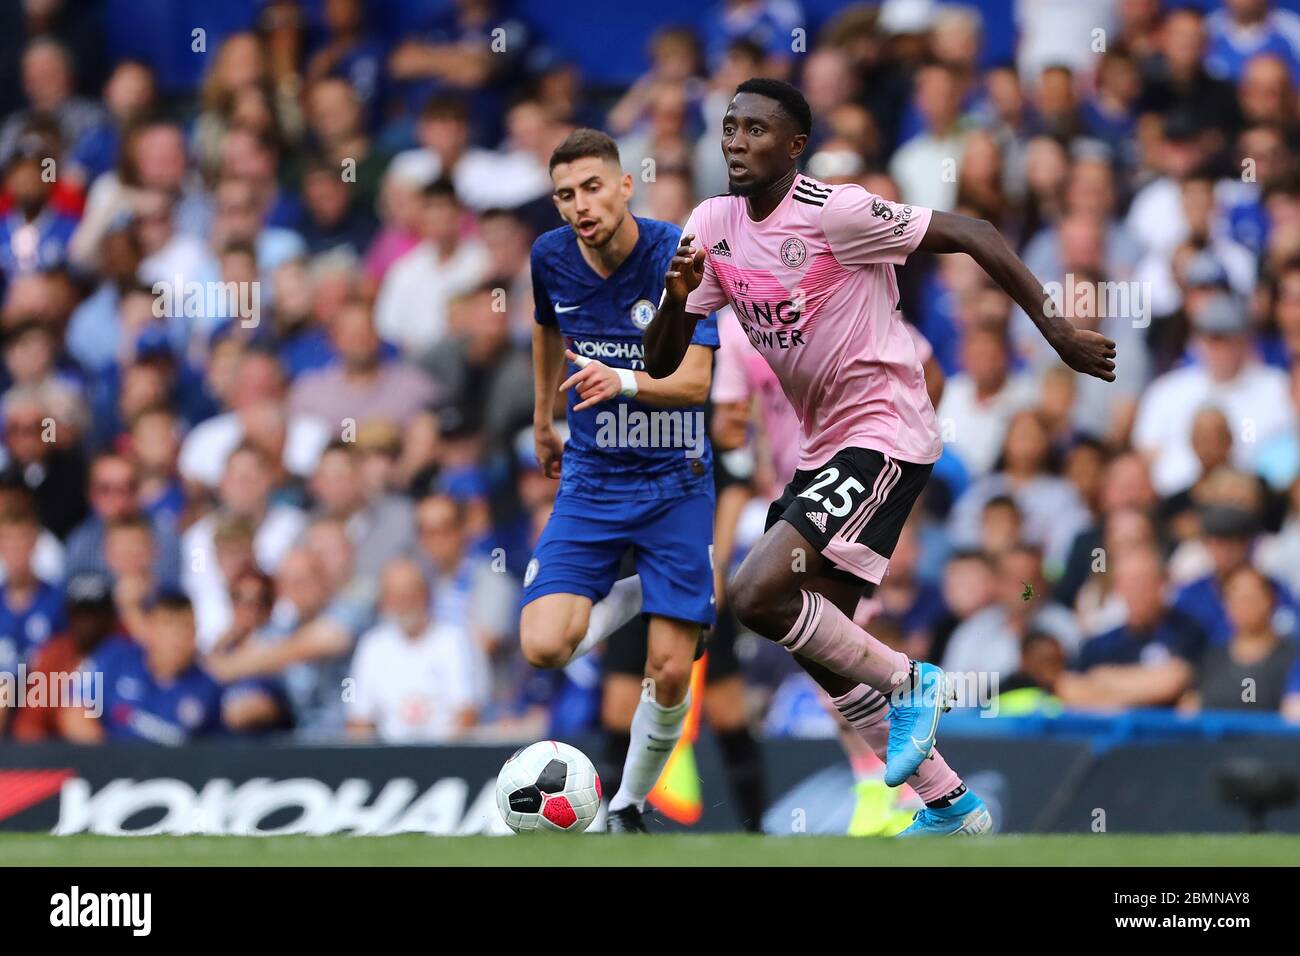 Wilfred Ndidi of Leicester City and Jorginho of Chelsea in action during the Premier League match between Chelsea and Leicester City at Stamford Bridge.(Final Score: Chelsea 1 - 1 Leicester) Stock Photo